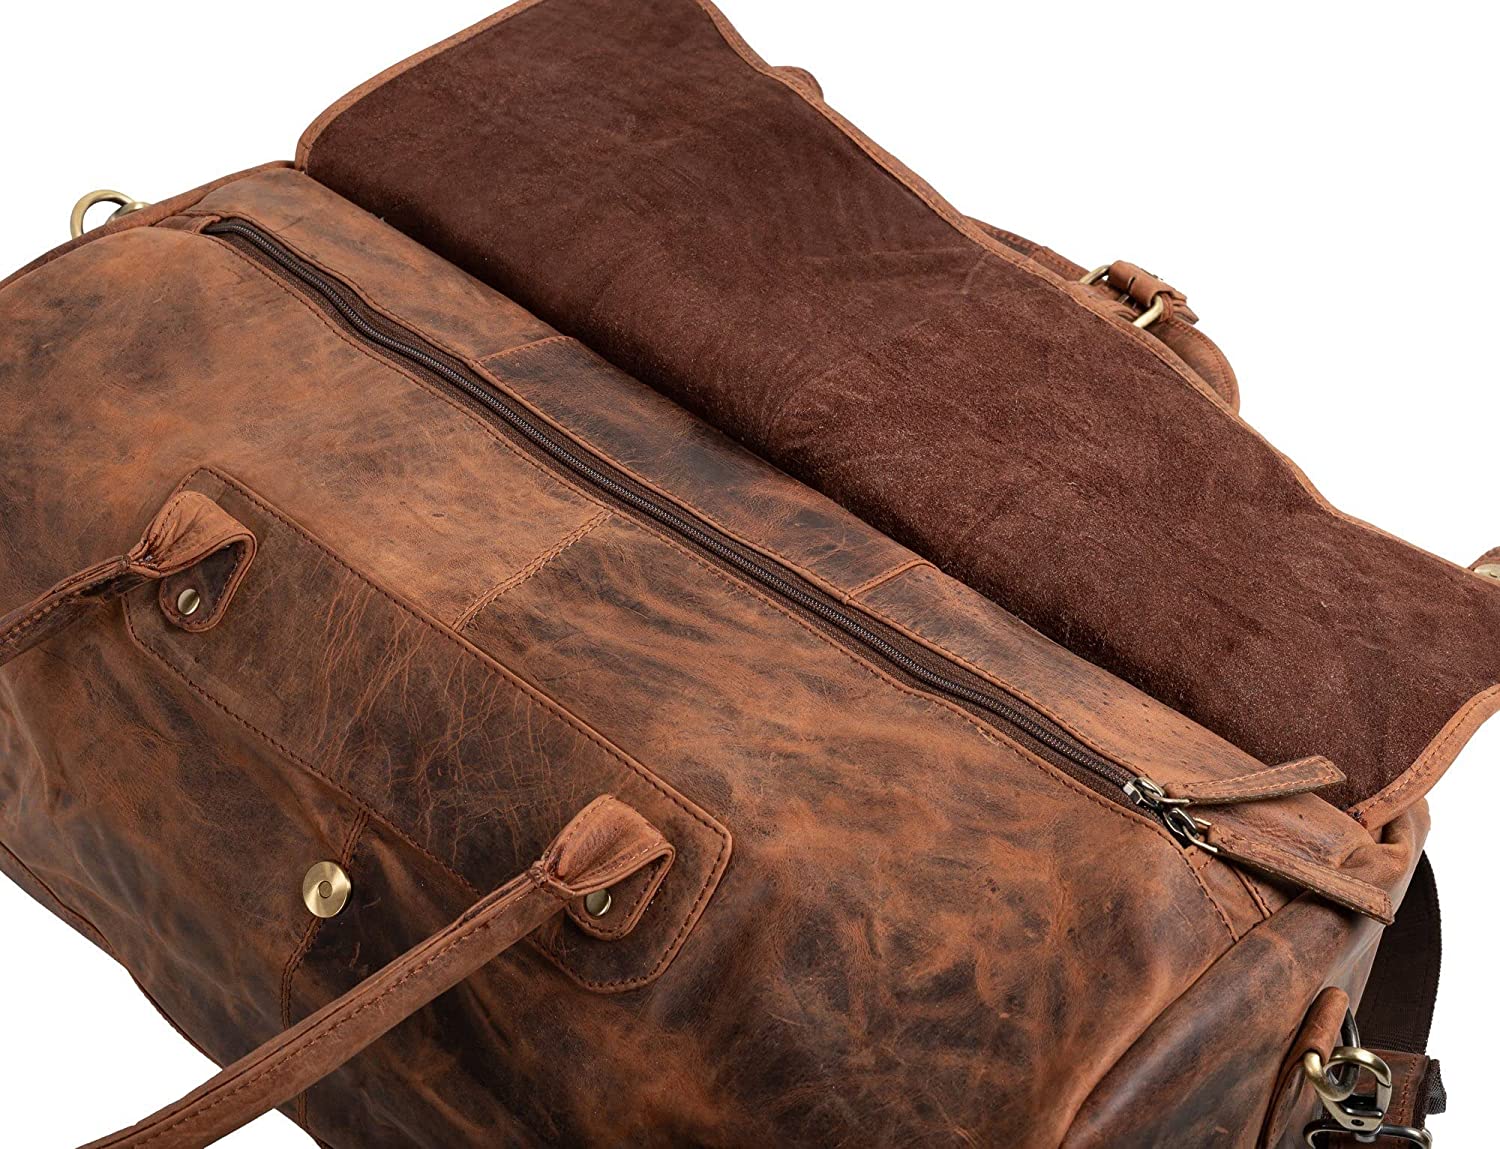 Leather Backpacks and Duffel Bags: How to Impress Your Clients With Th